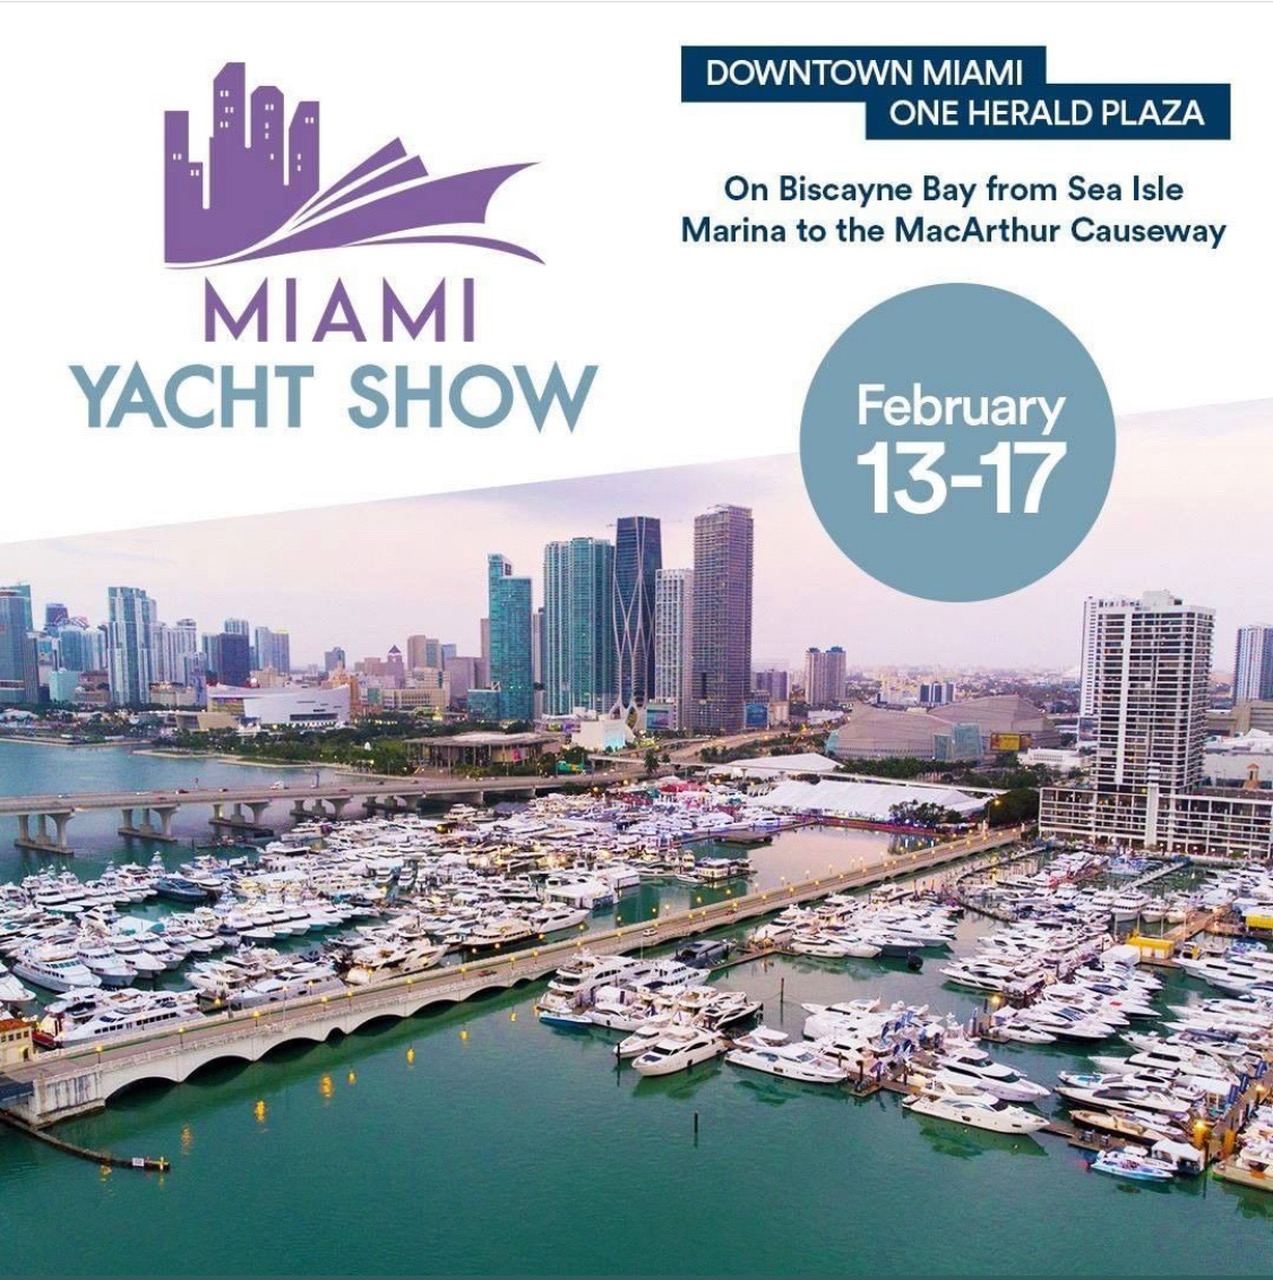 Miami Yacht Show - February 13-17 - Interglobal Yacht Sales